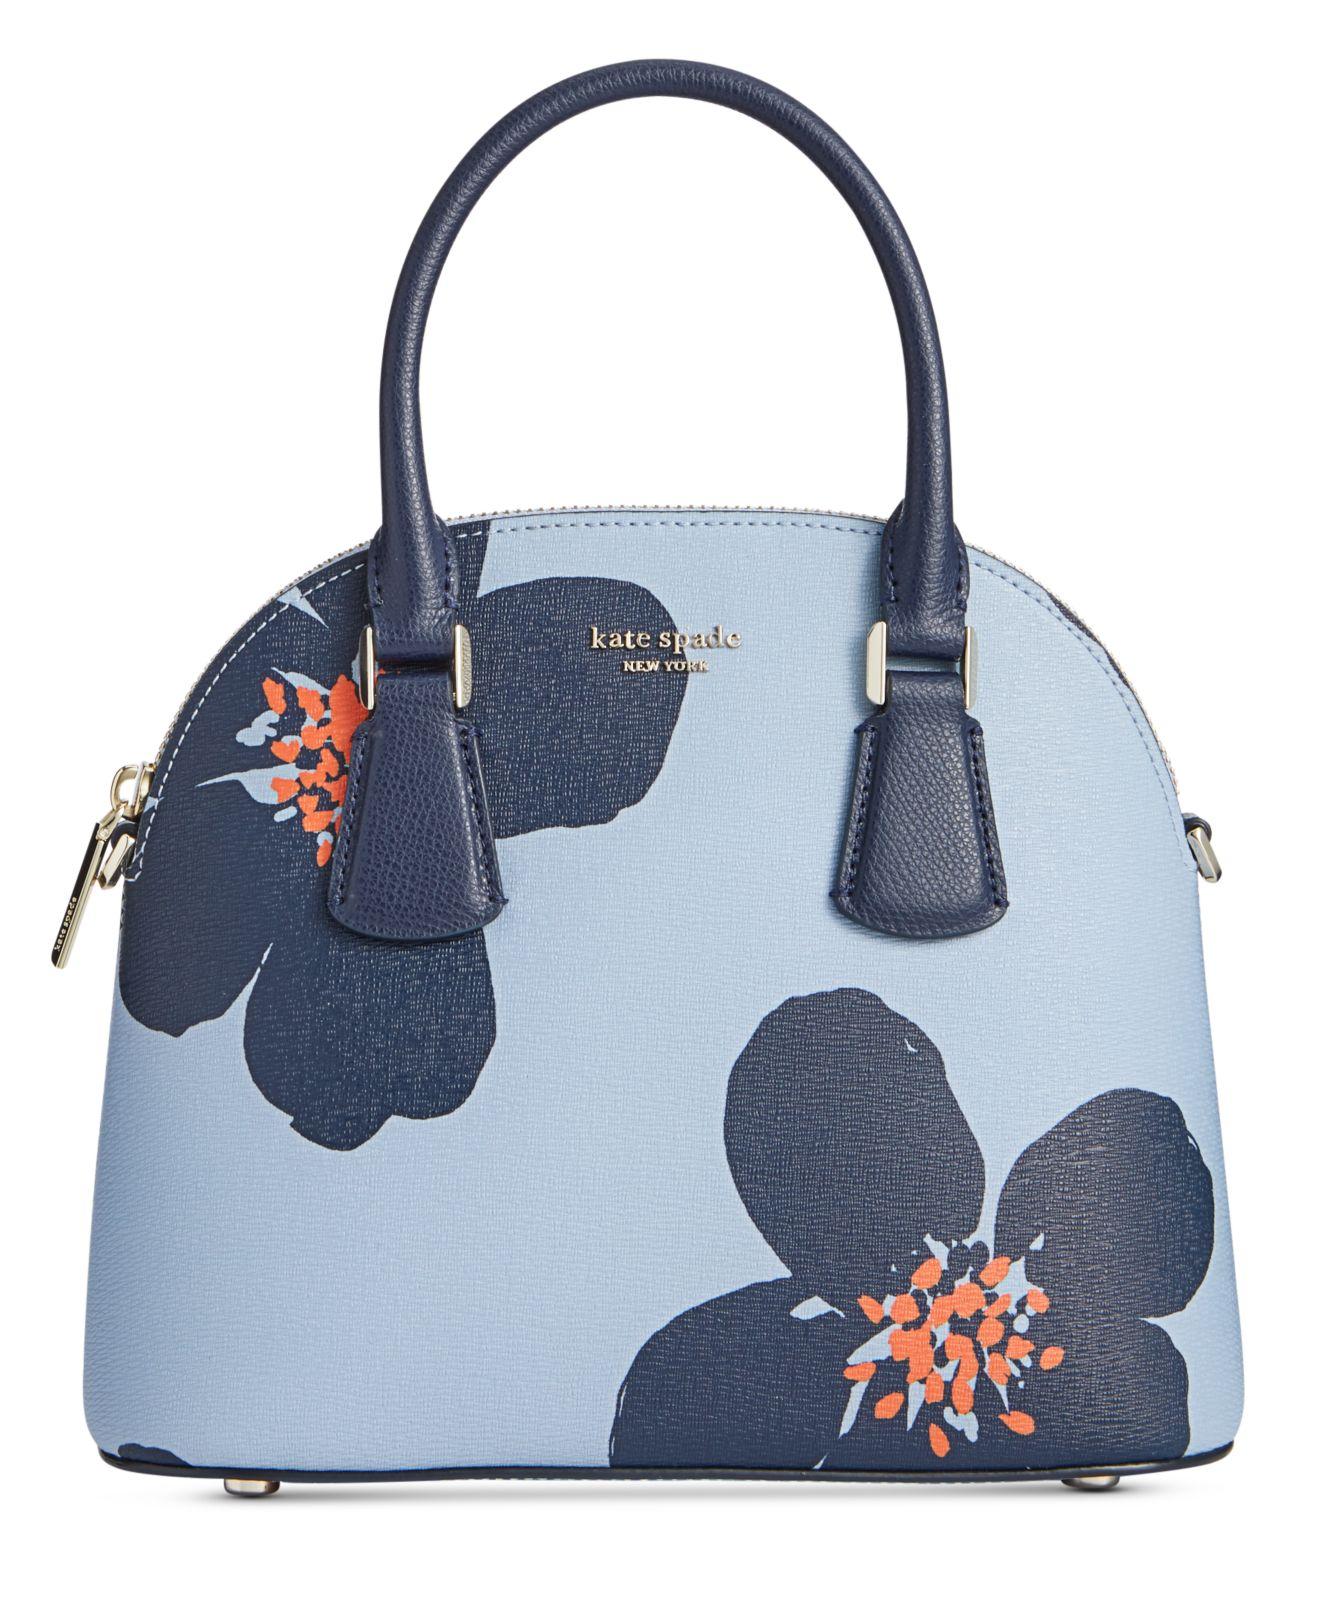 Kate Spade Sylvia Grand Flora Small Dome Leather Satchel in Blue - Lyst